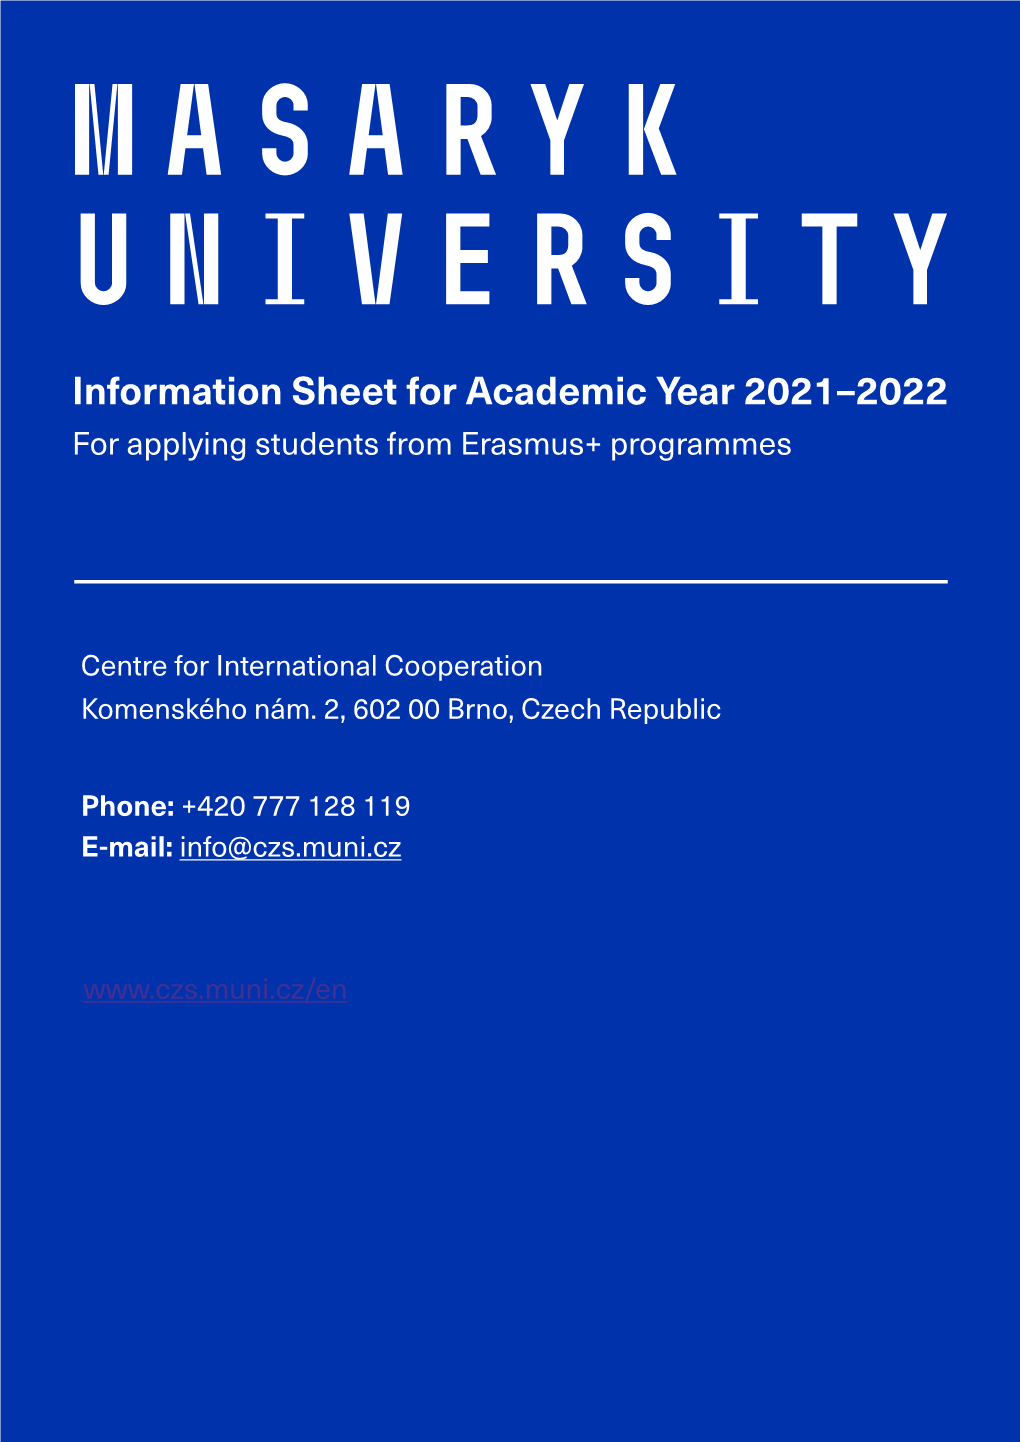 Information Sheet for Academic Year 2021–2022 for Applying Students from Erasmus+ Programmes